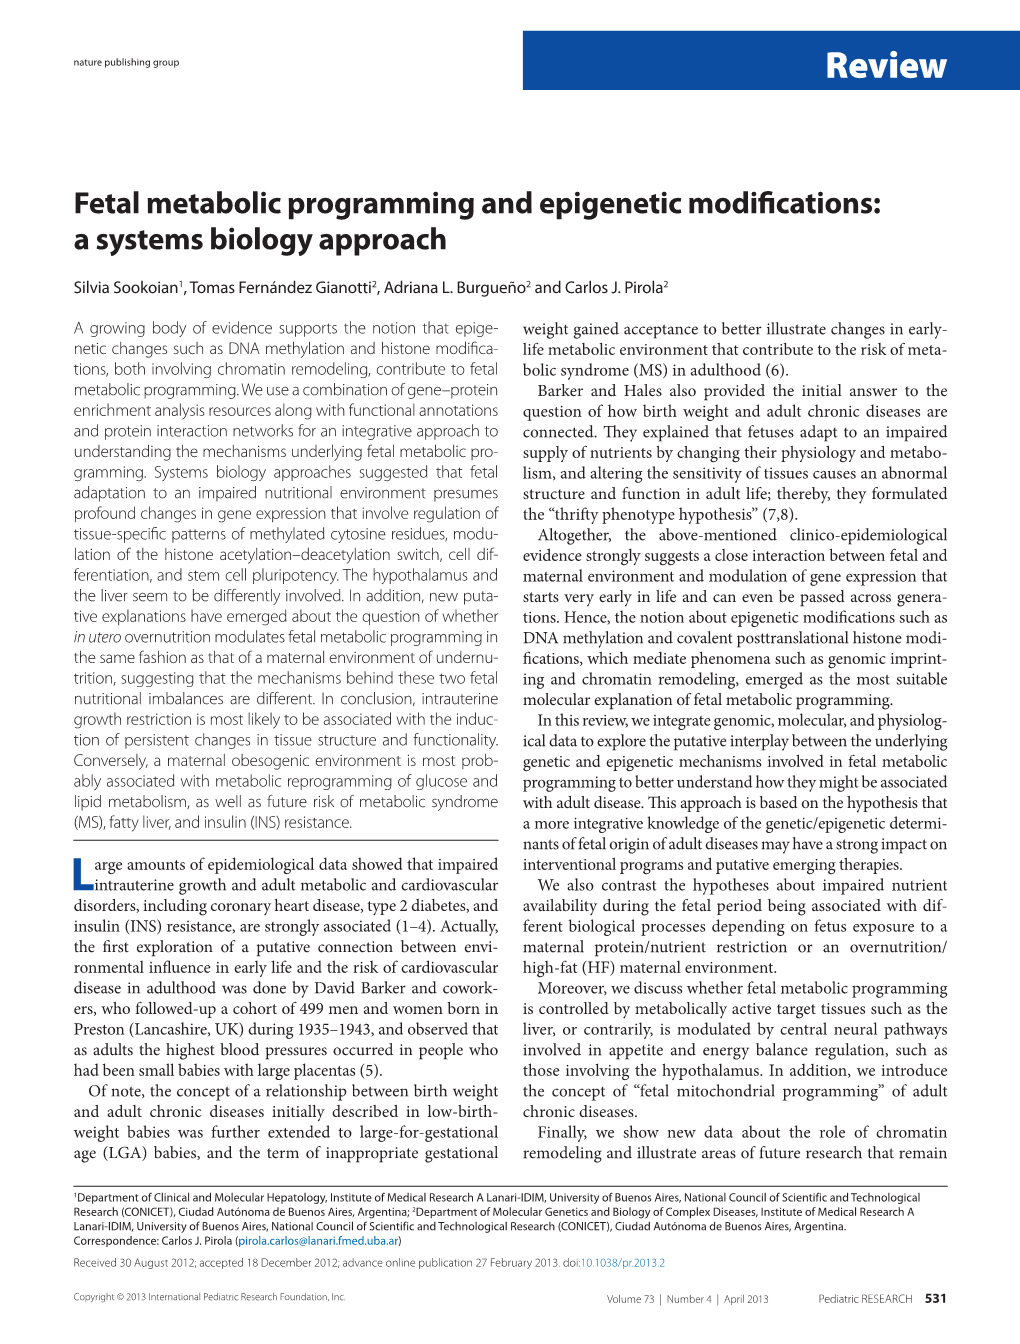 Fetal Metabolic Programming and Epigenetic Modifications: a Systems Biology Approach